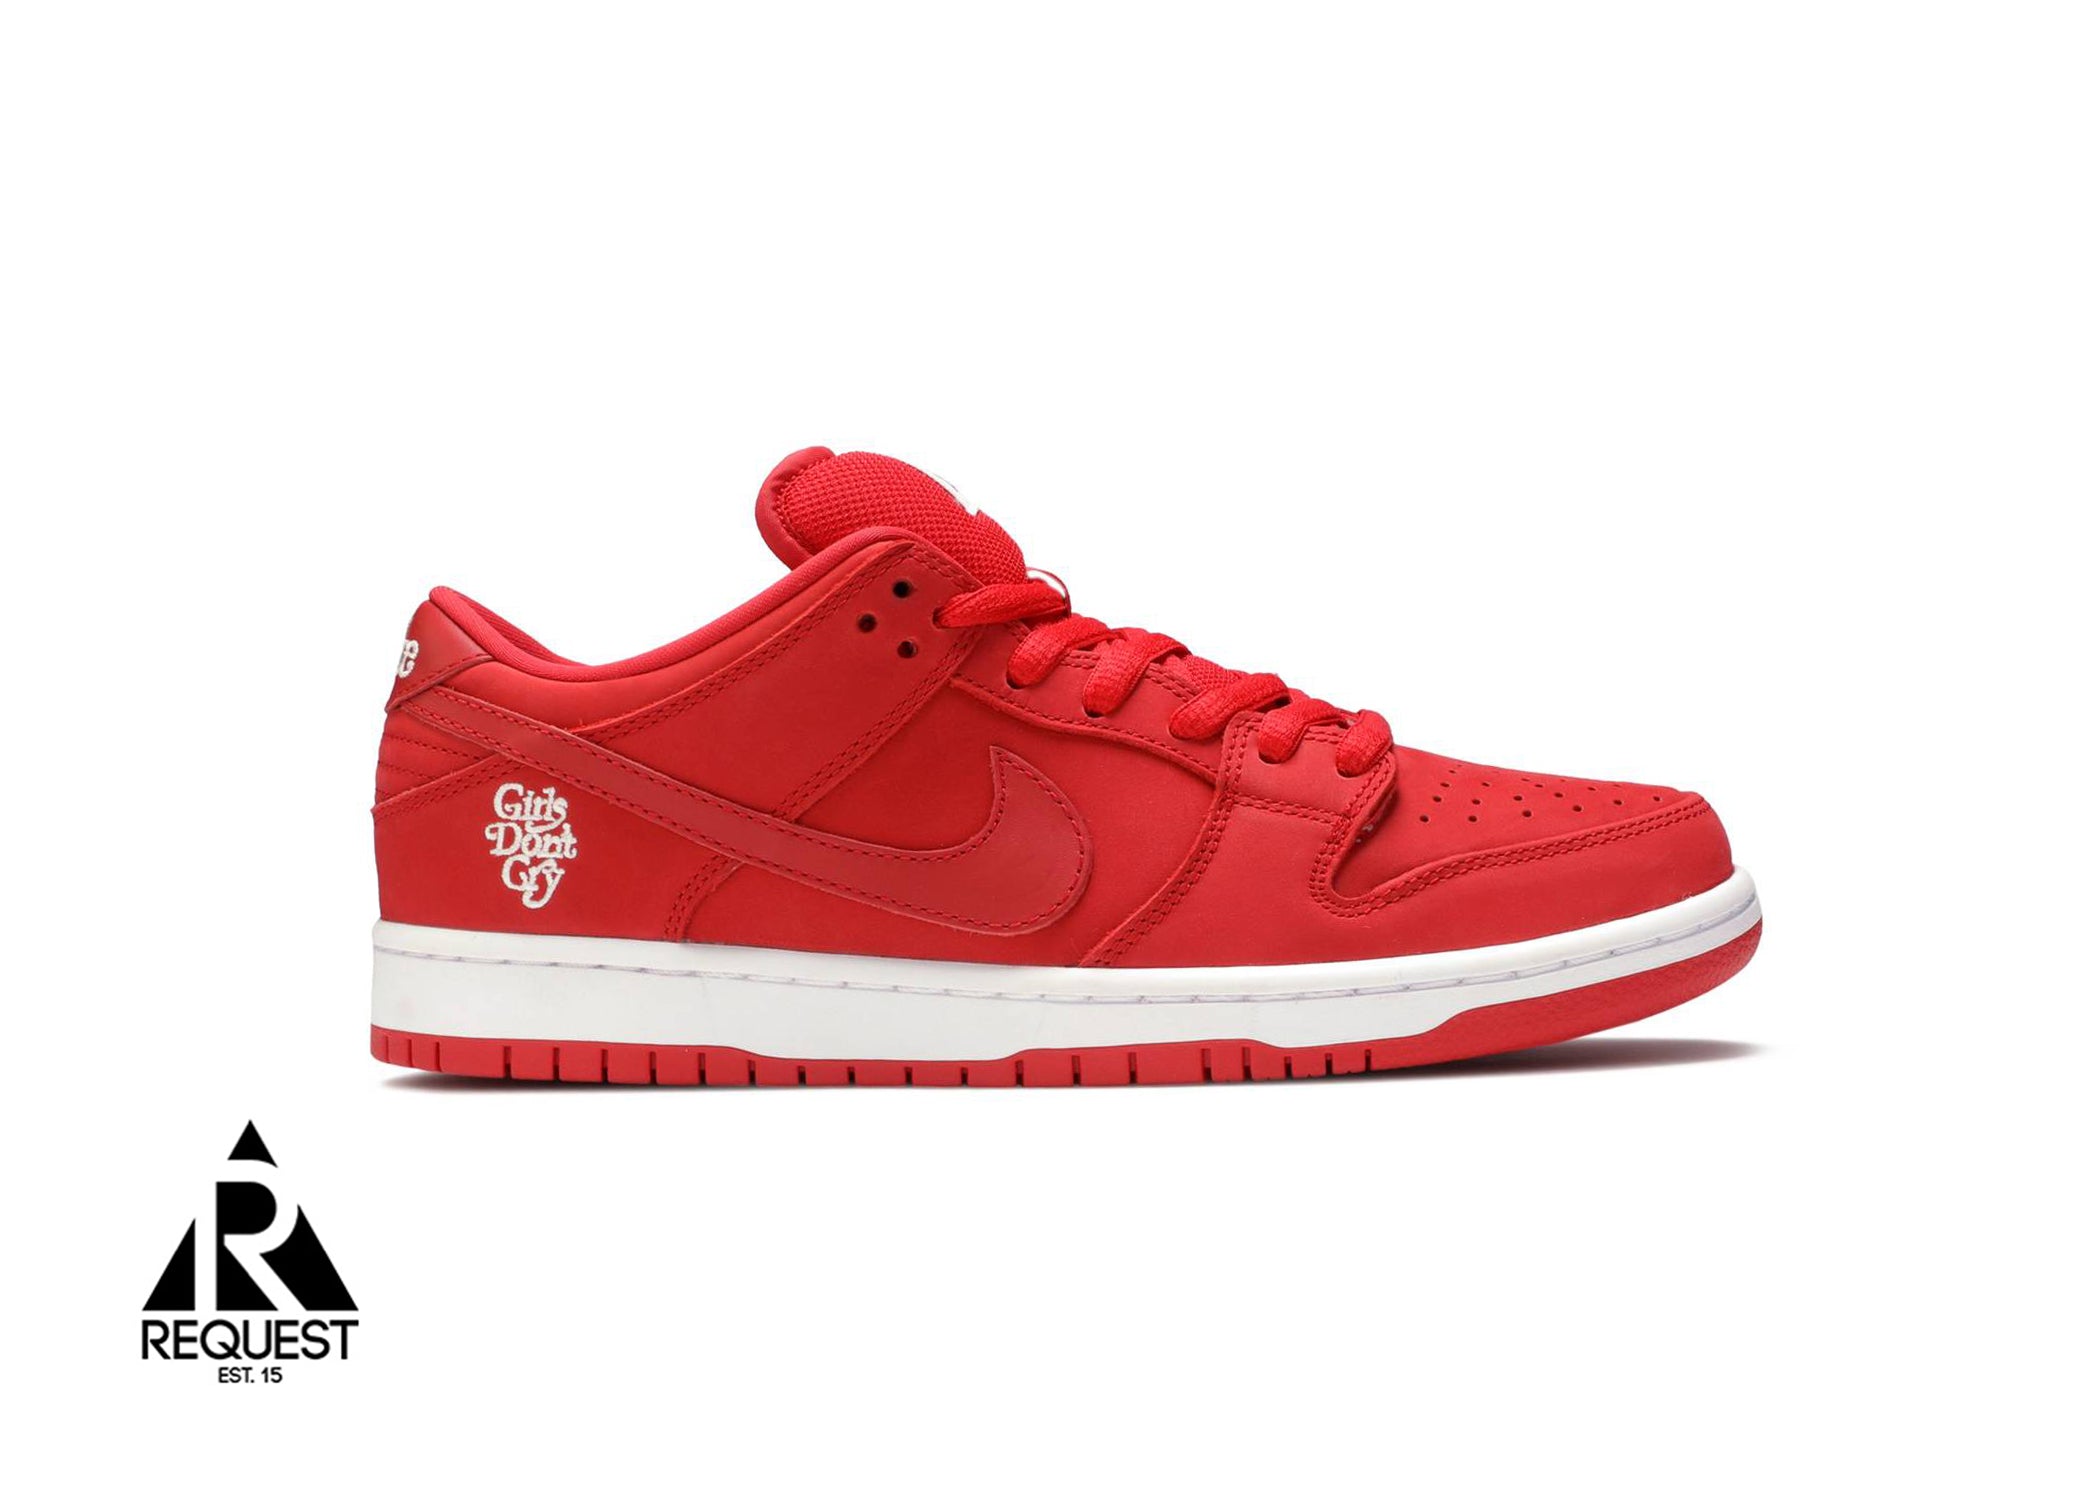 Nike Dunk Low Pro Verdy Girls Don't Cry "Coming Back | Request